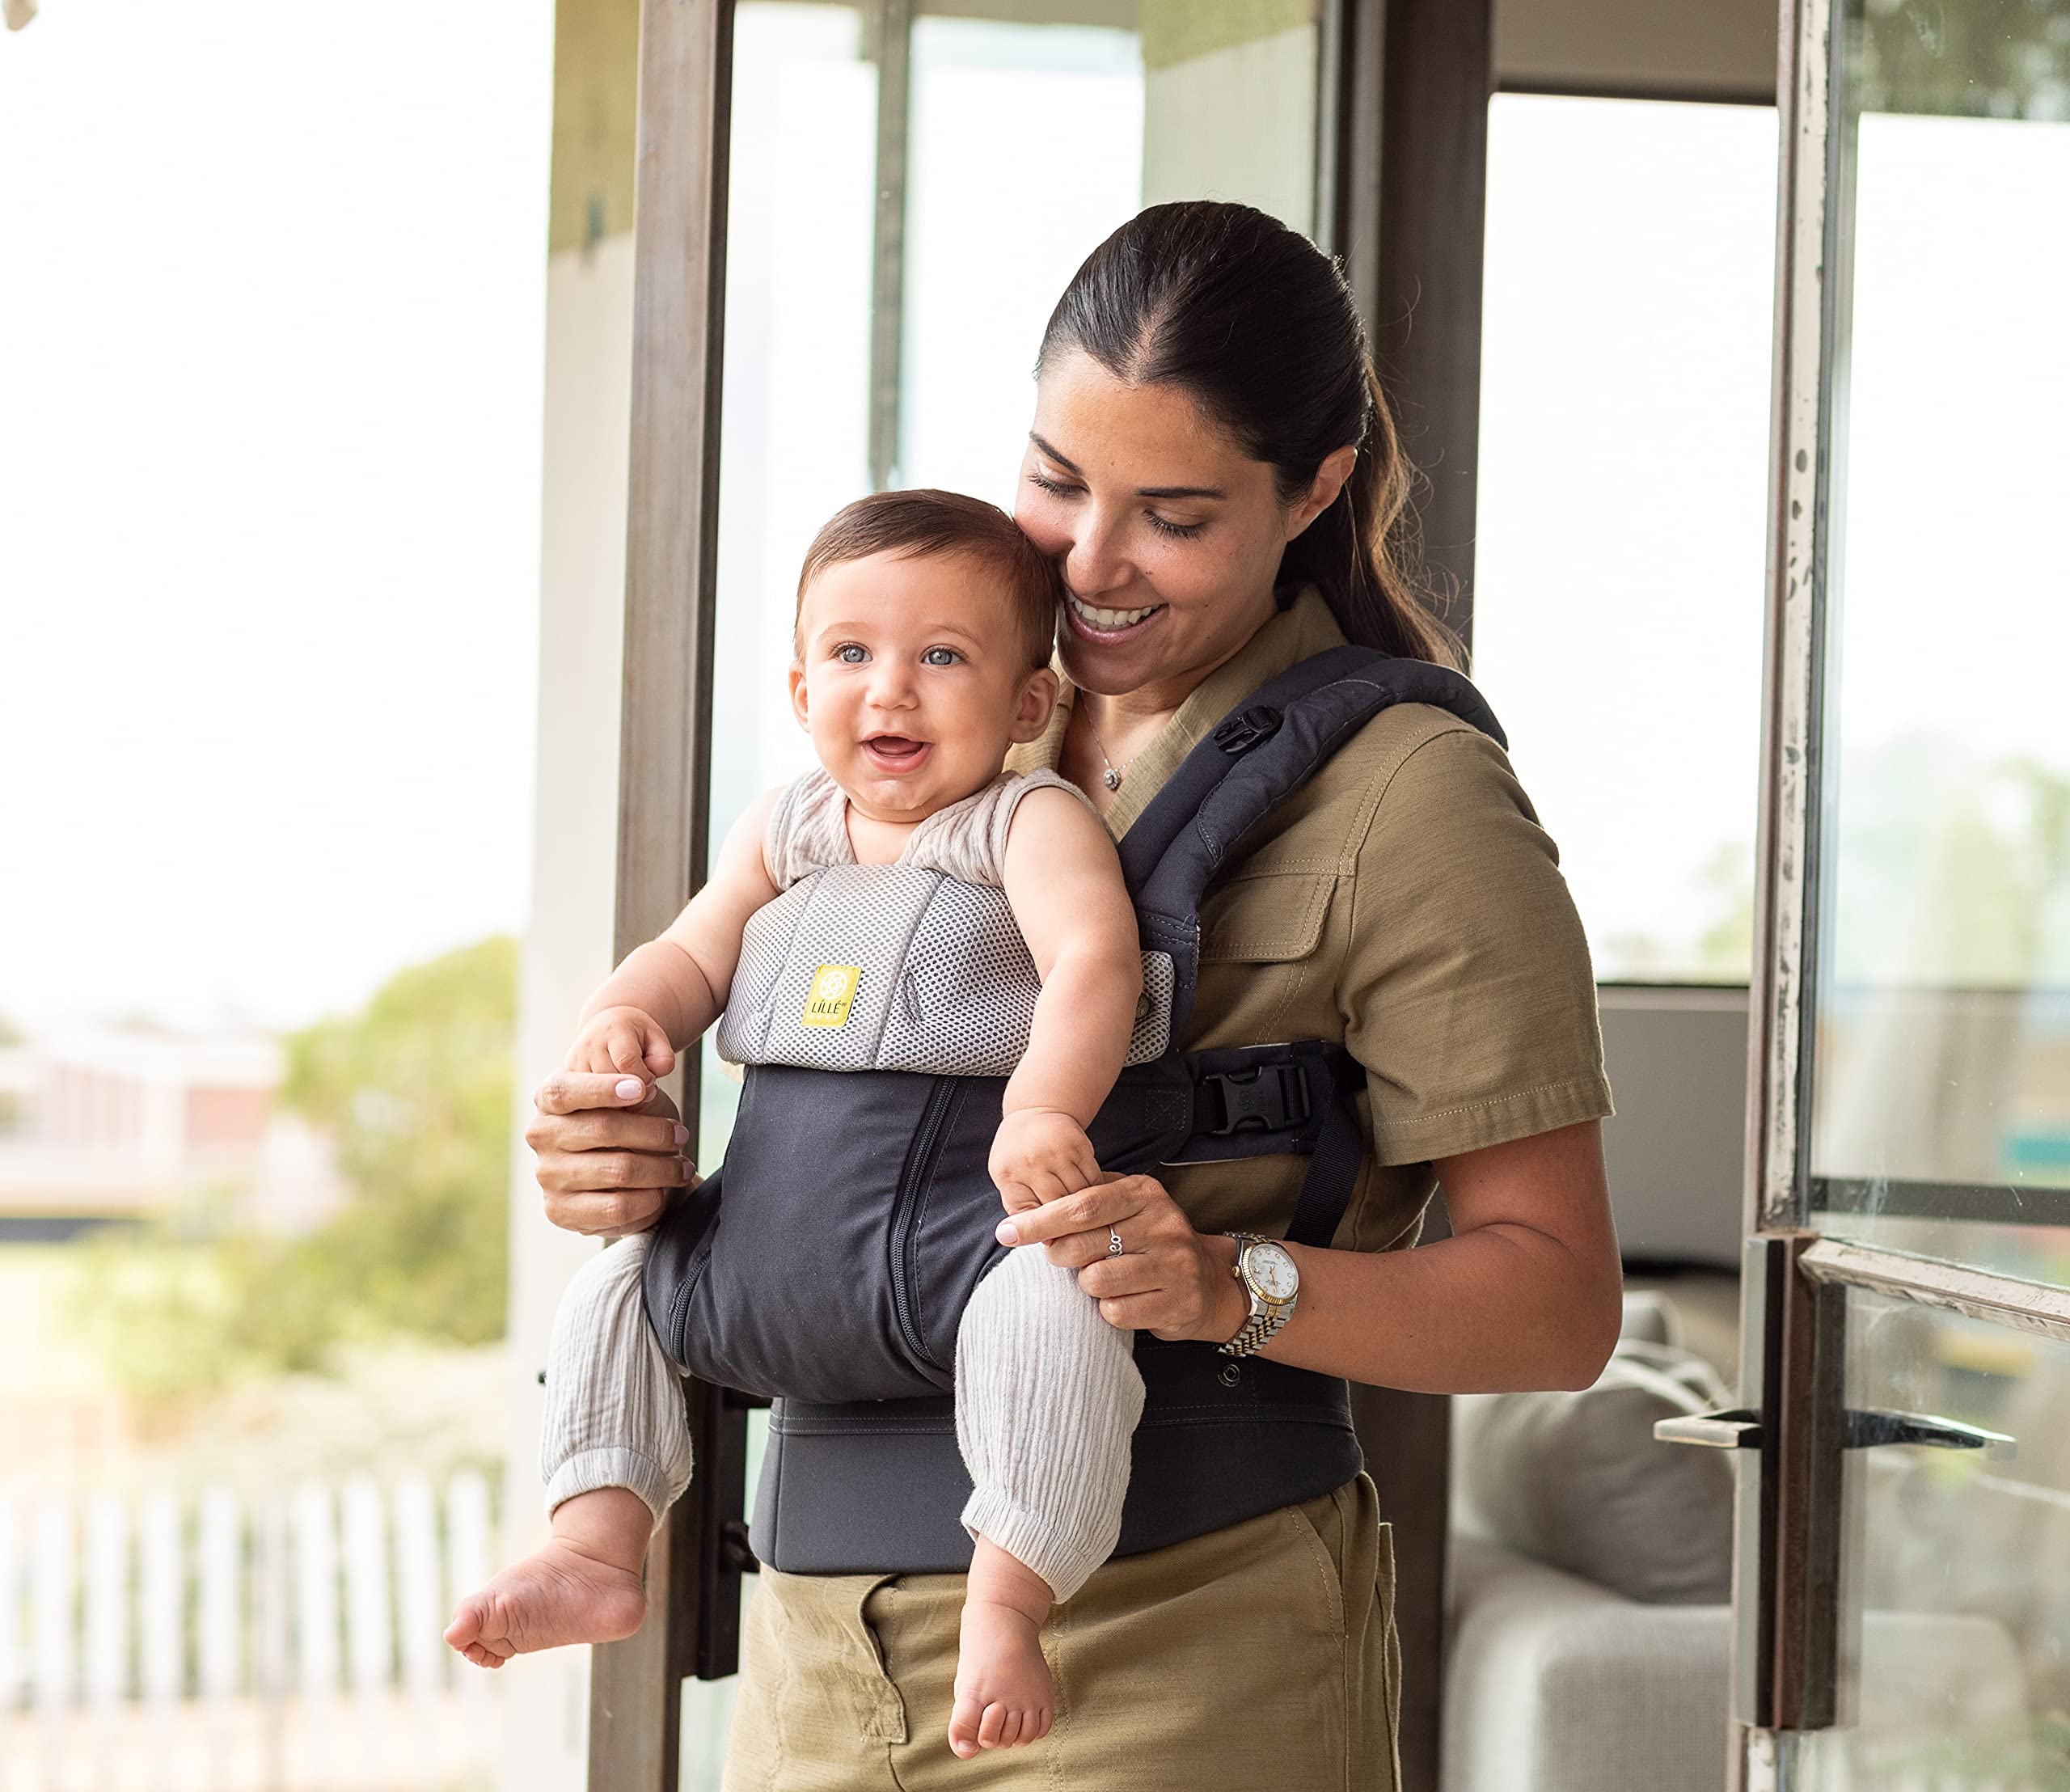 LÍLLÉbaby Complete All Seasons Ergonomic 6-in-1 Baby Carrier Newborn to Toddler with Lumbar Support & Dragonfly Wrap Infant Carrier Bundle